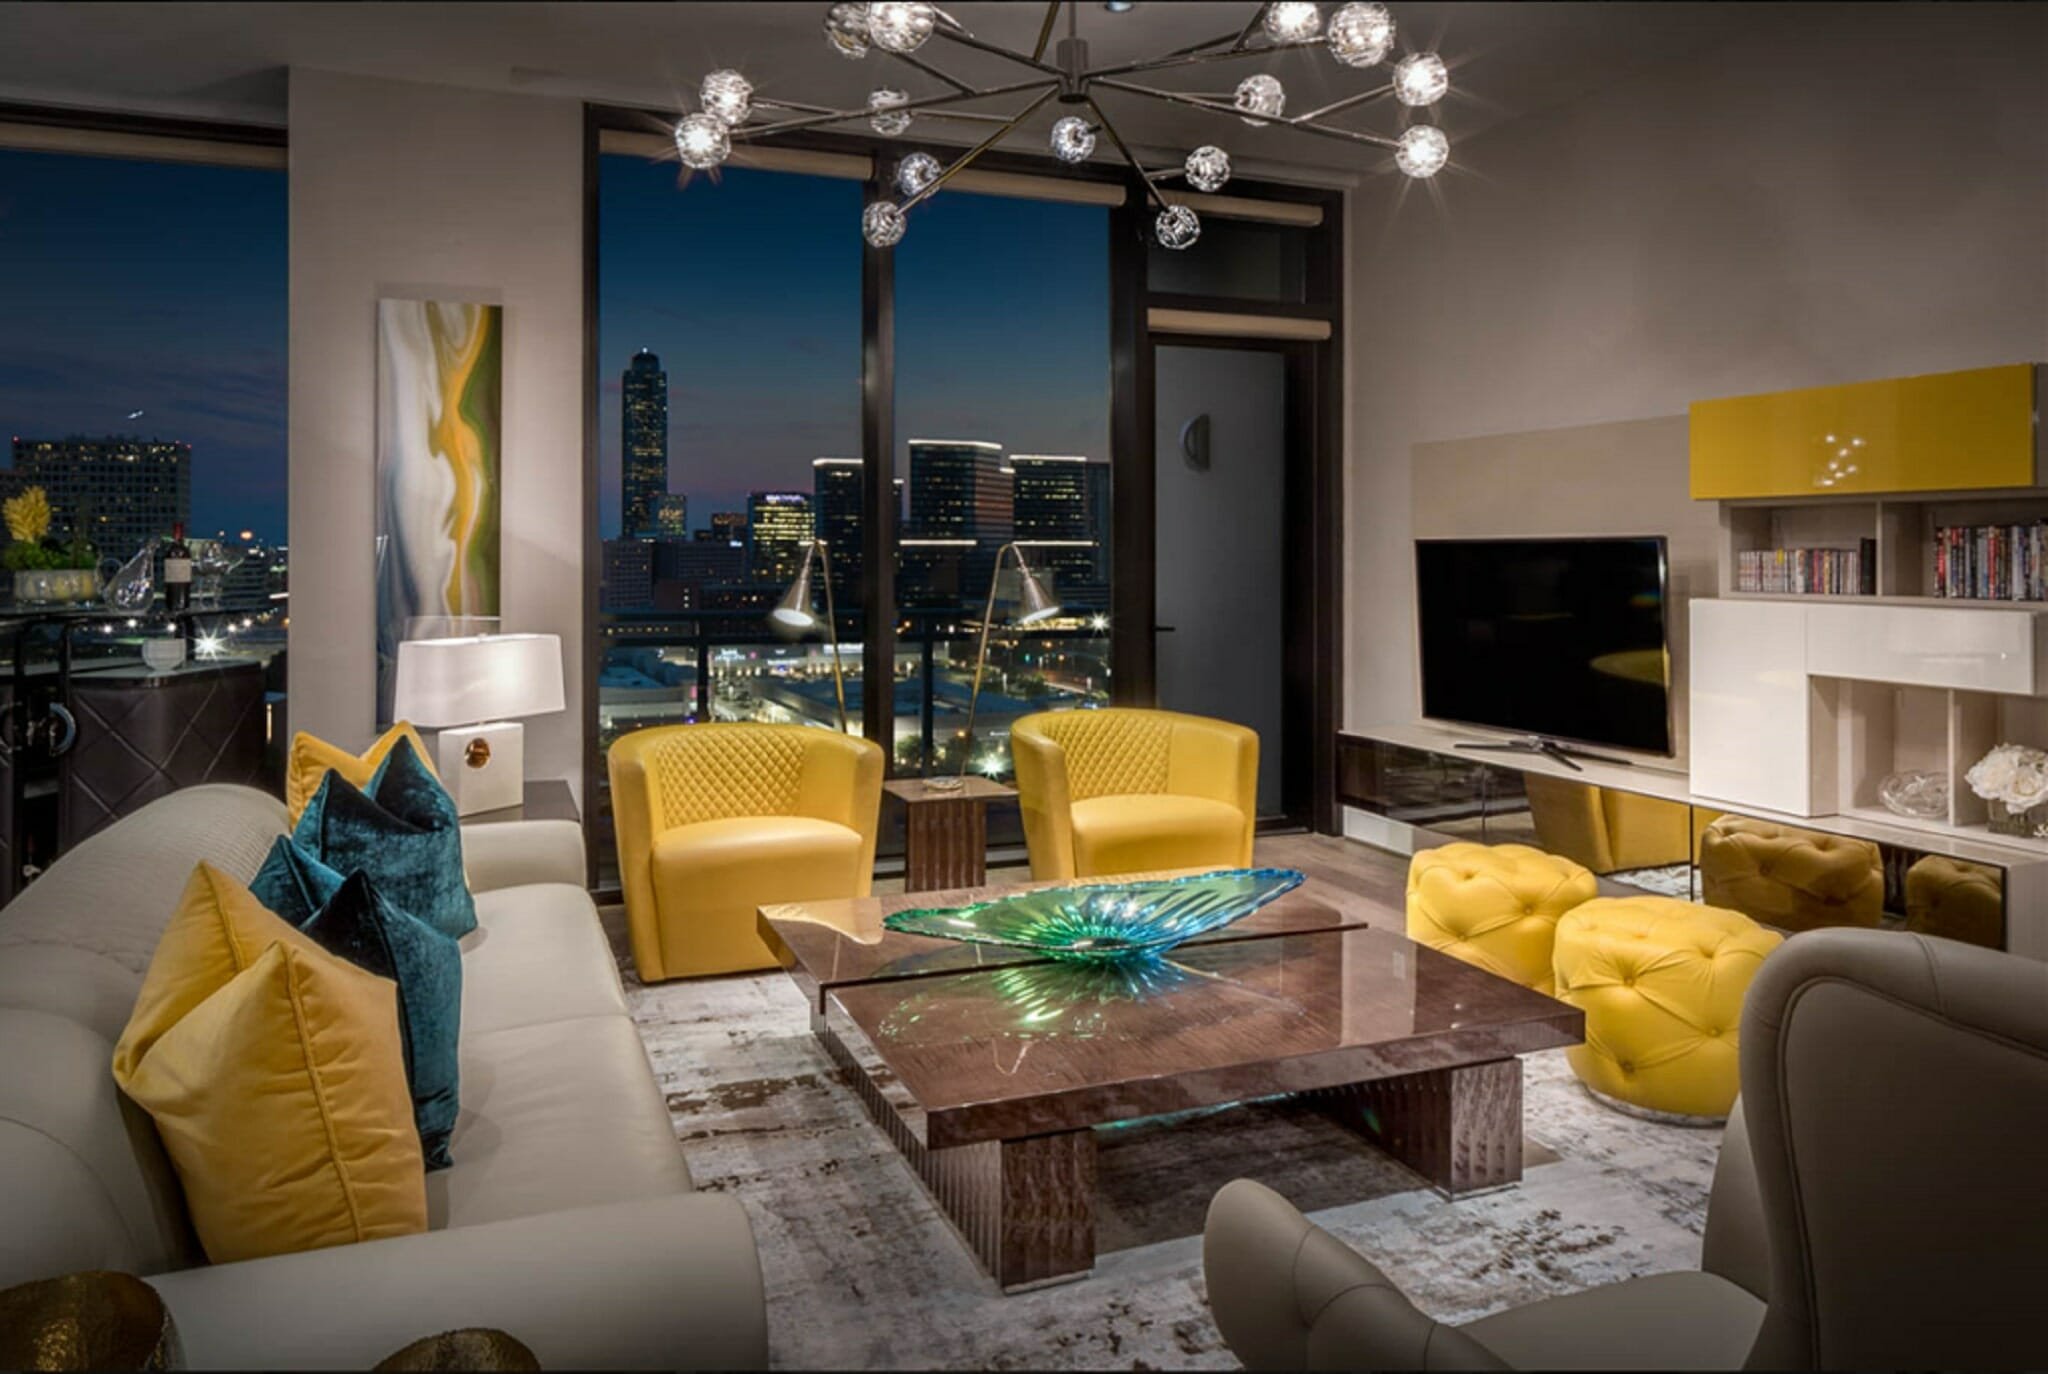 Pantone 2021 color of the year, illuminating yellow as an accent in a contemporary loft